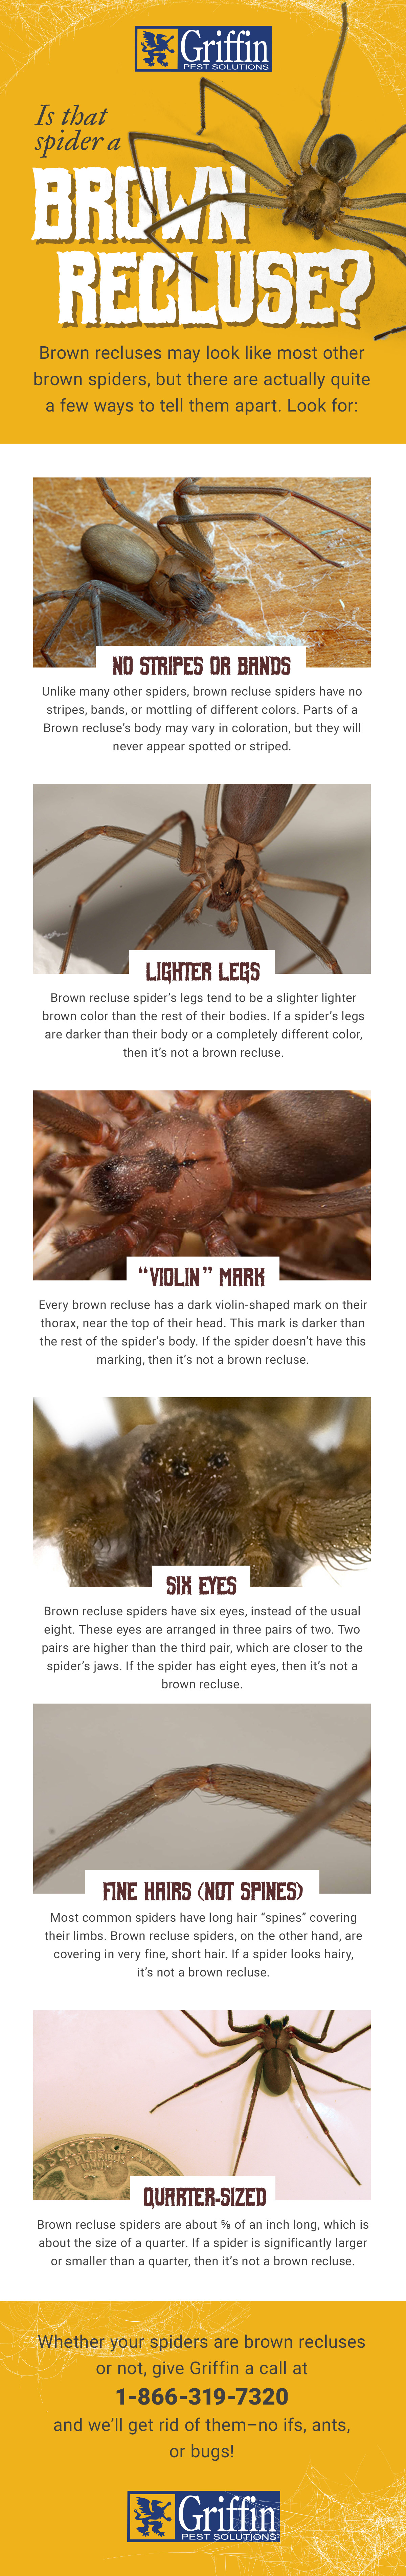 Is that spider a brown recluse? Infographic